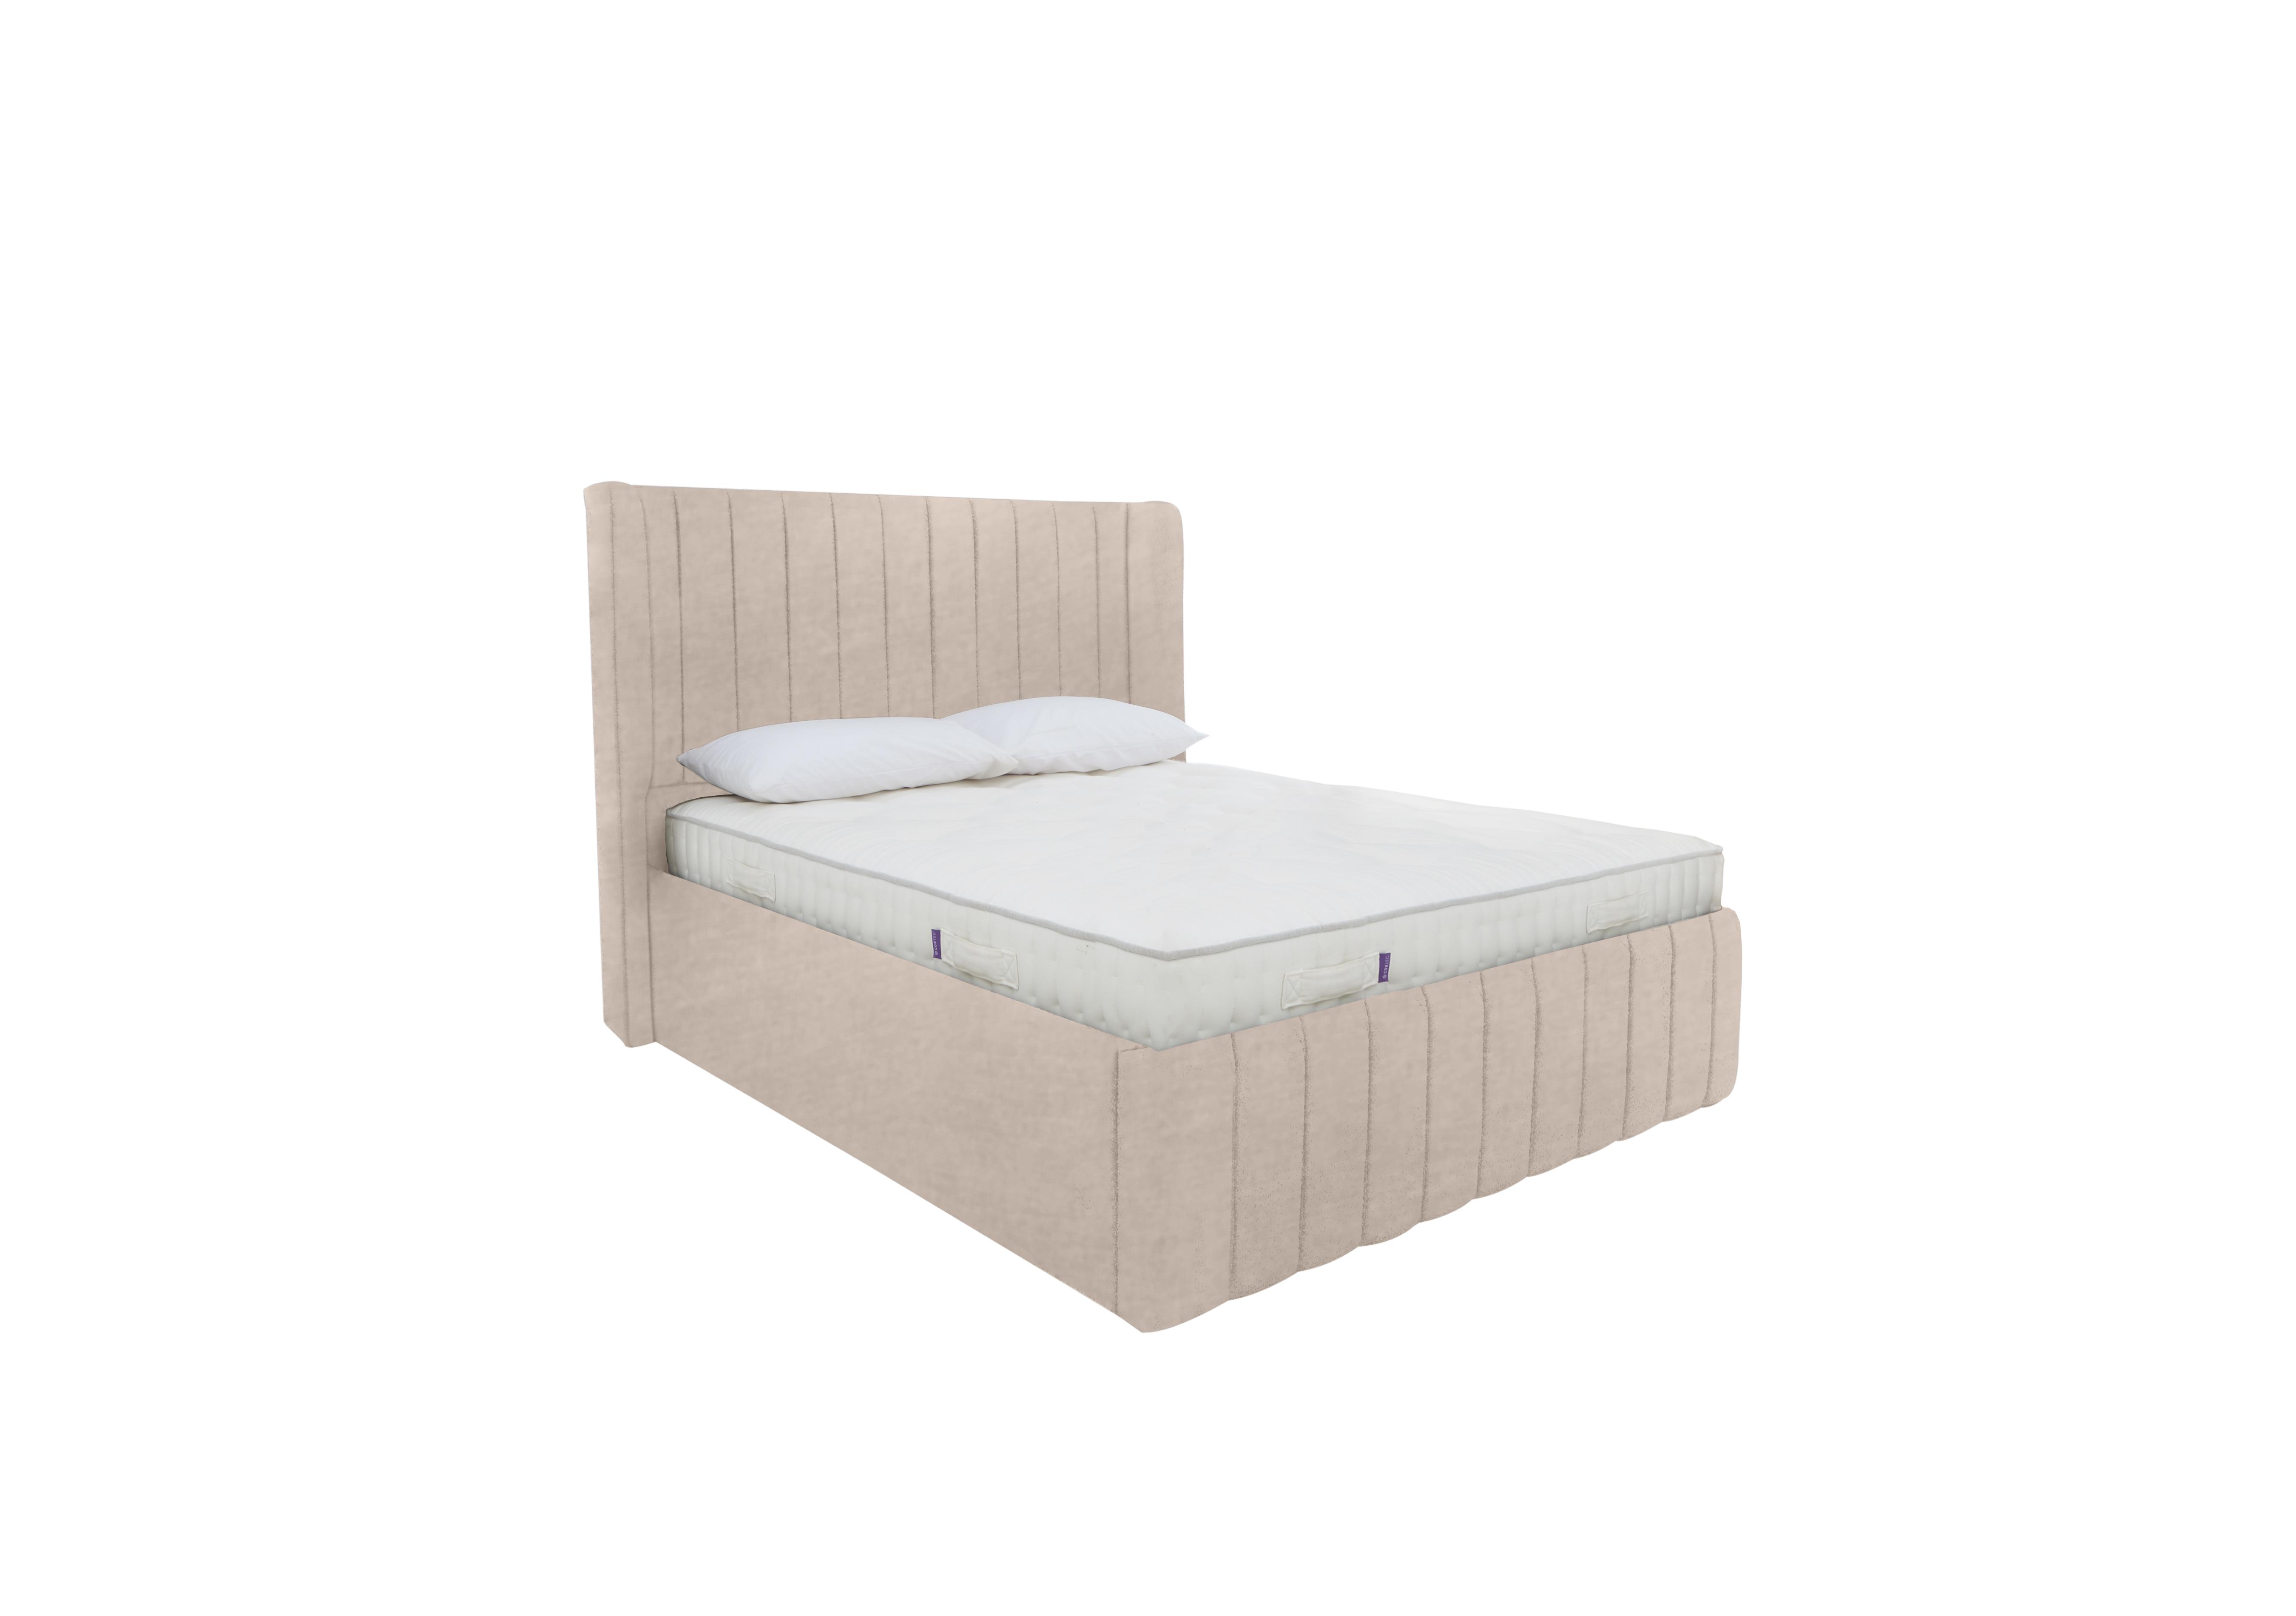 Eira Low Foot End Ottoman Bed Frame in Savannah Almond on Furniture Village